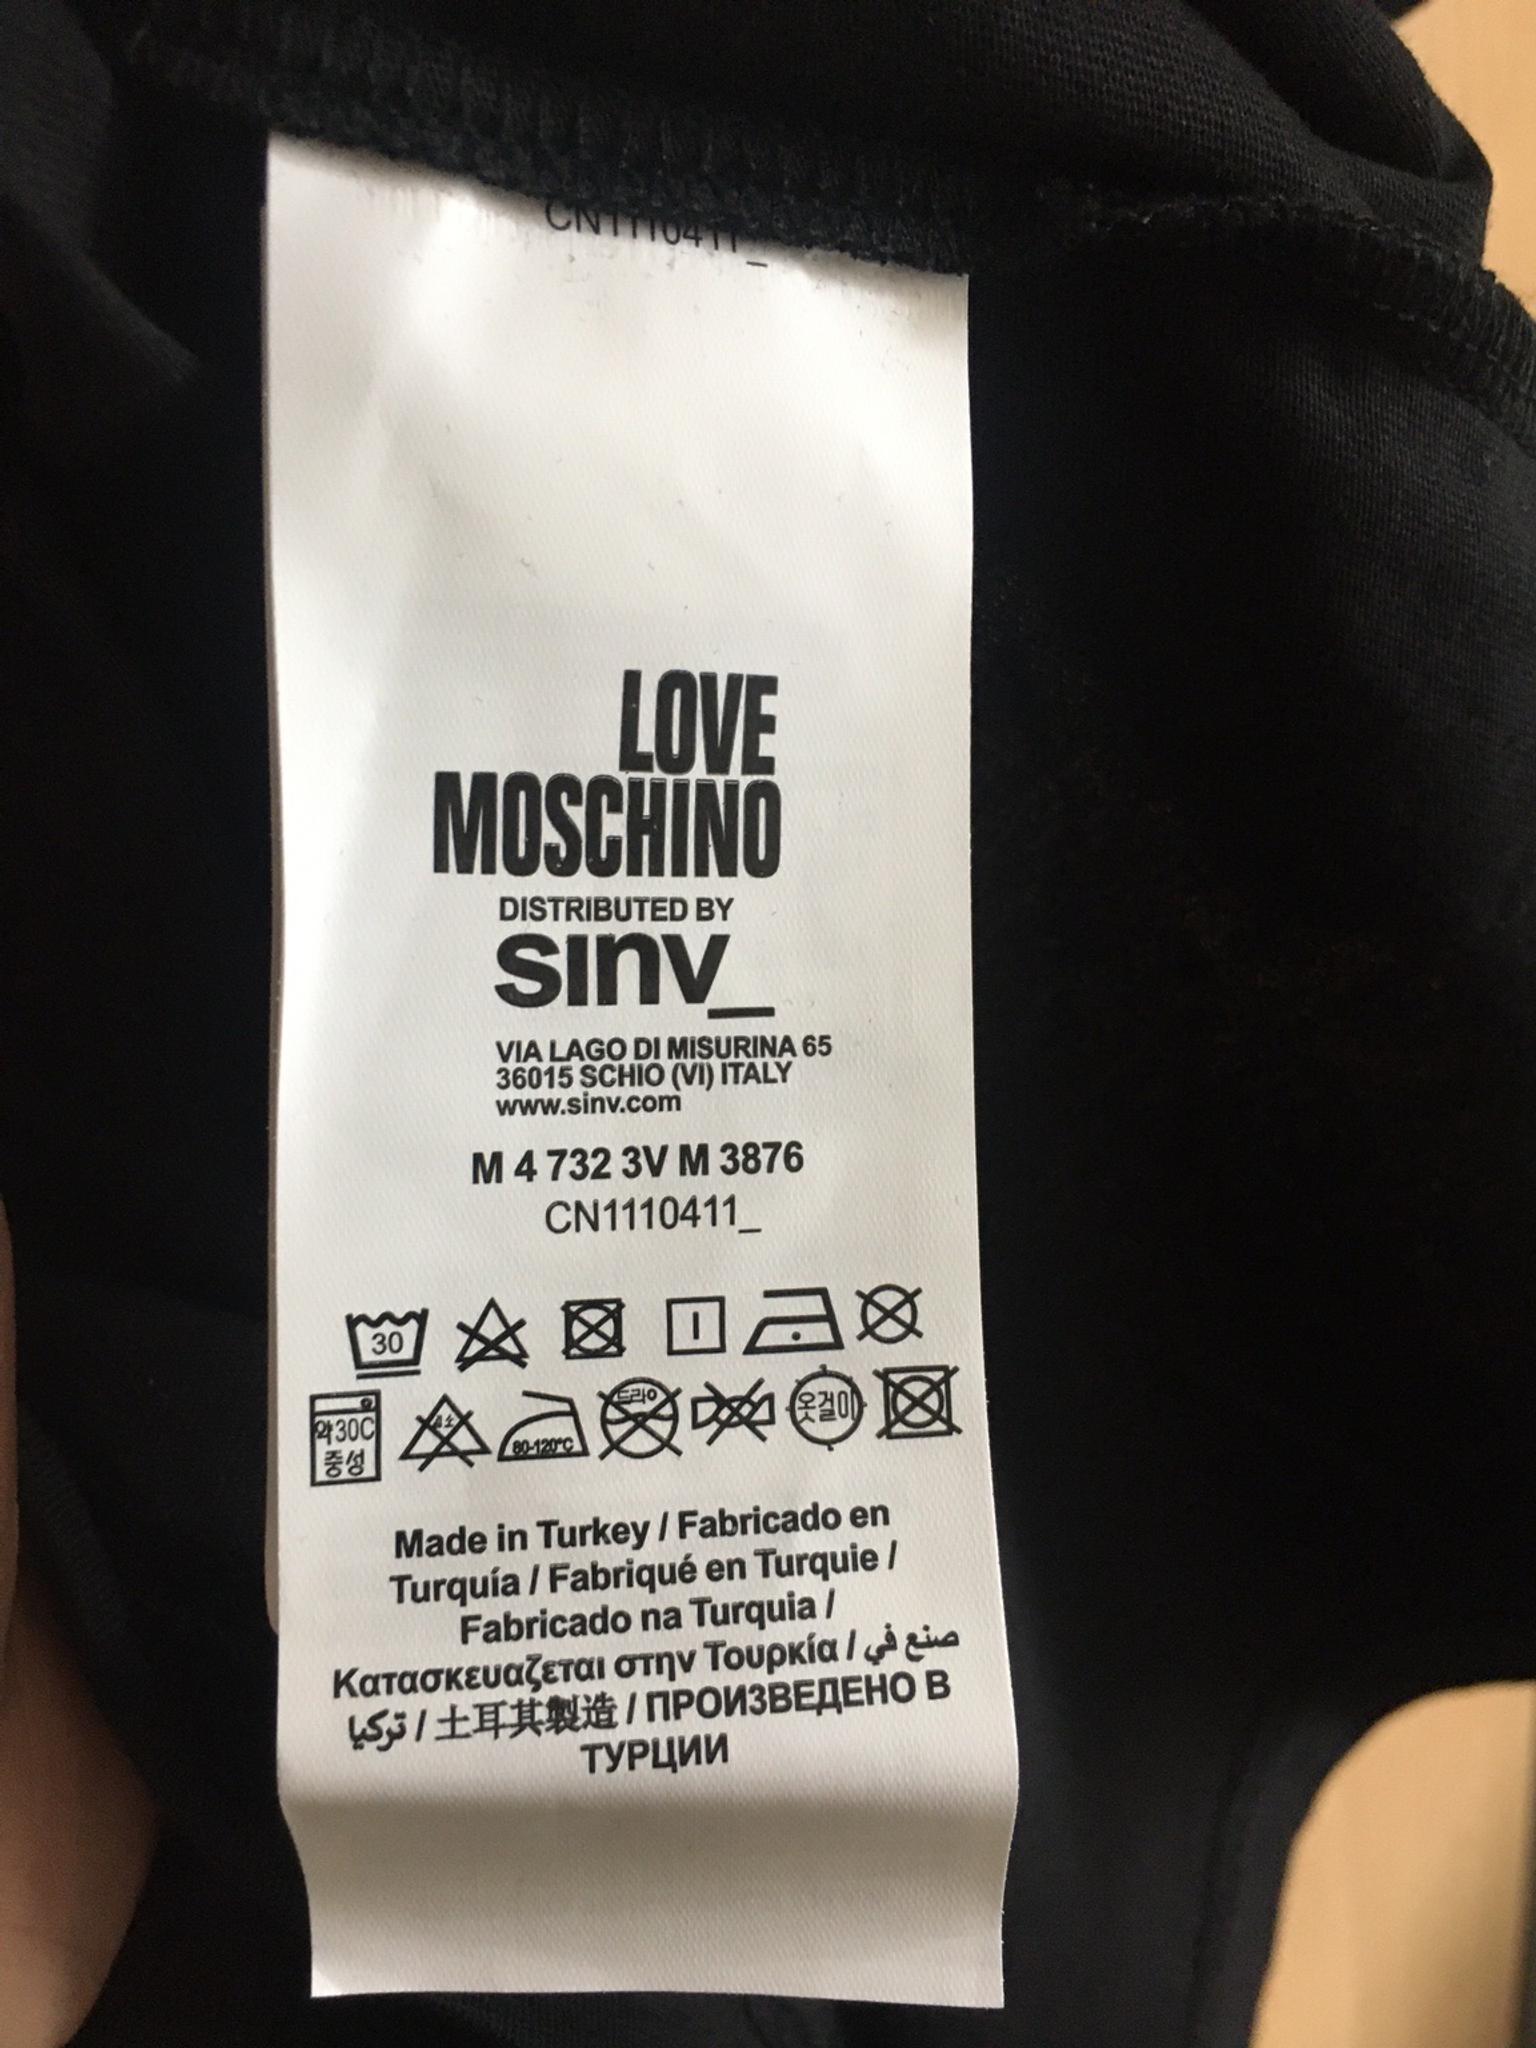 love moschino distributed by sinv